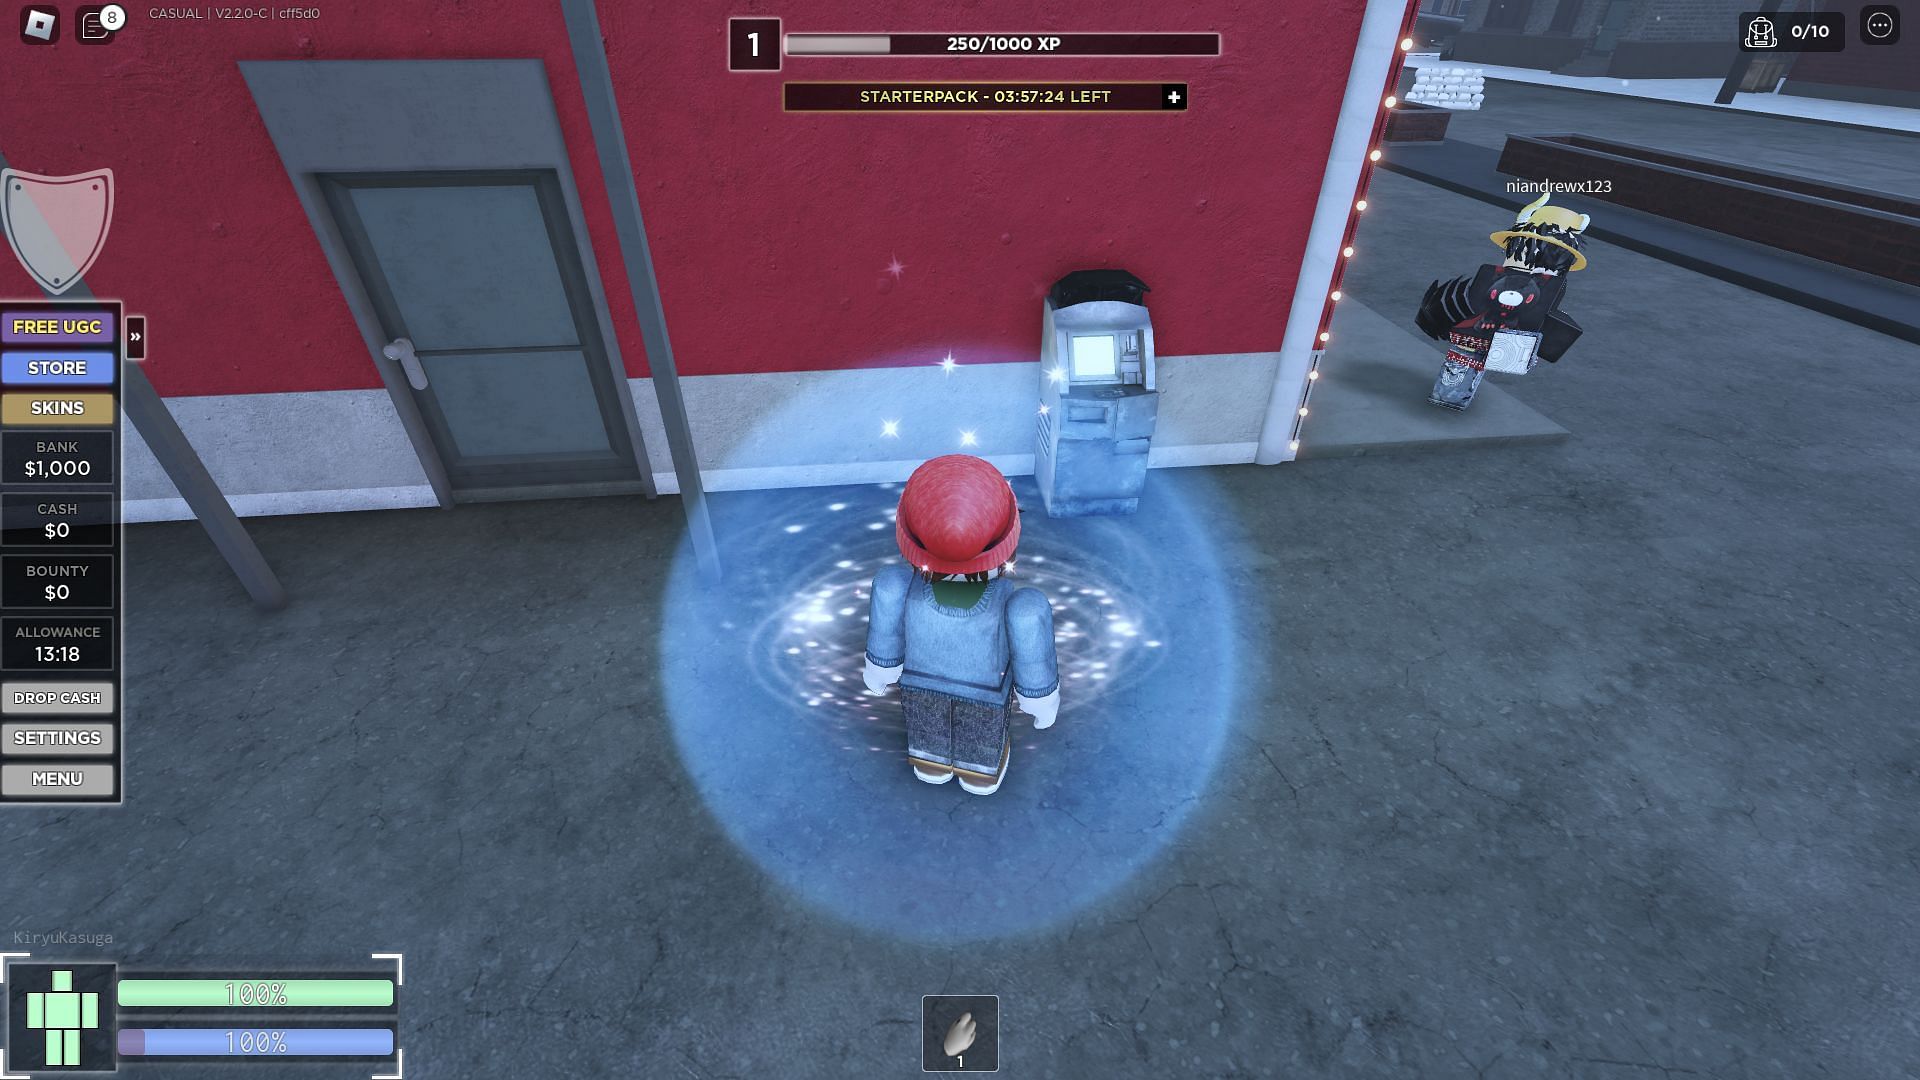 How to redeem codes for Criminality using ATMs (Image via Roblox)